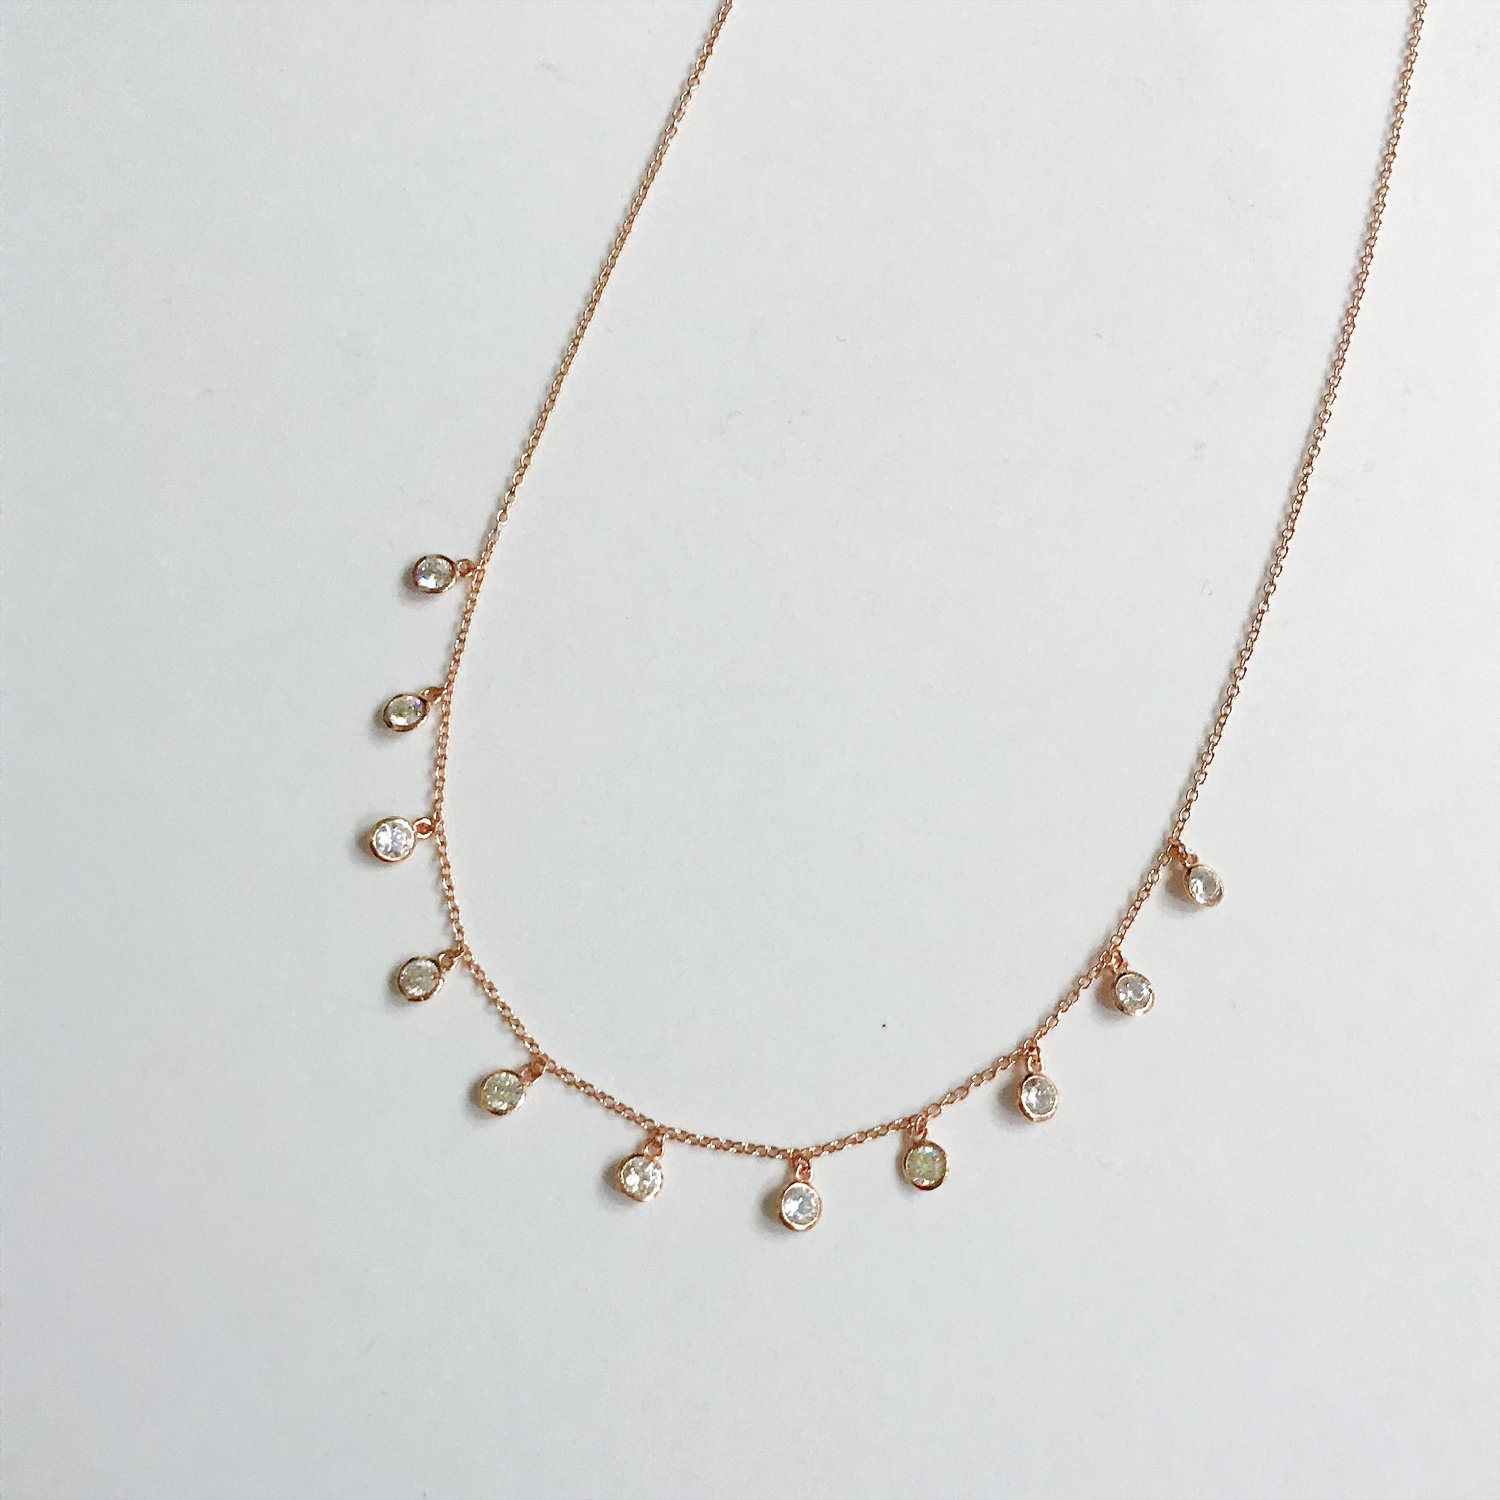 Hayley Gallery, Since 2007 18k Rose Gold with Quartz Necklace